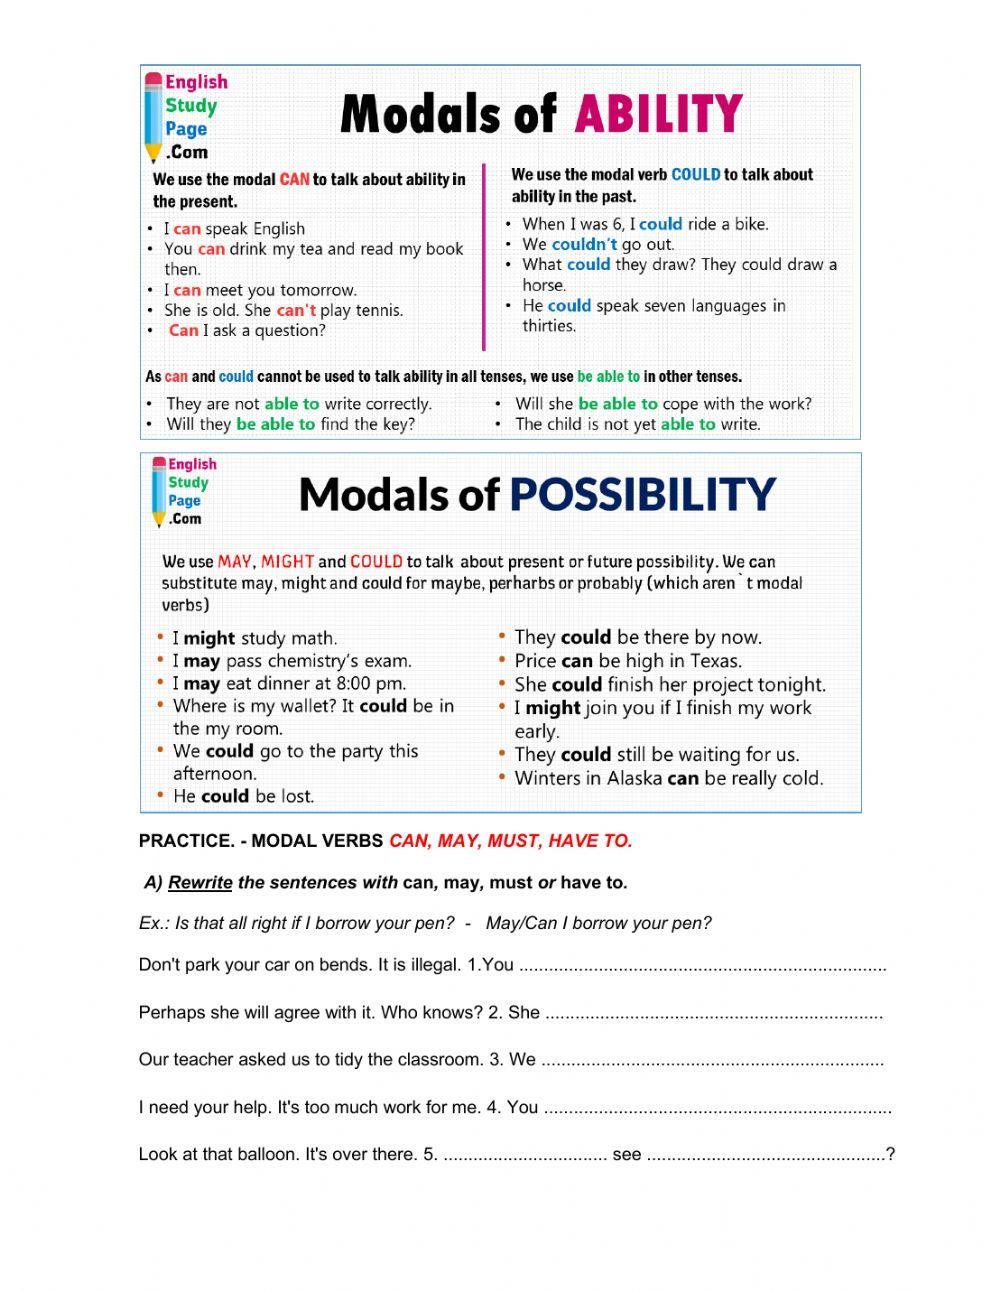 Modals of Ability and Possibility.